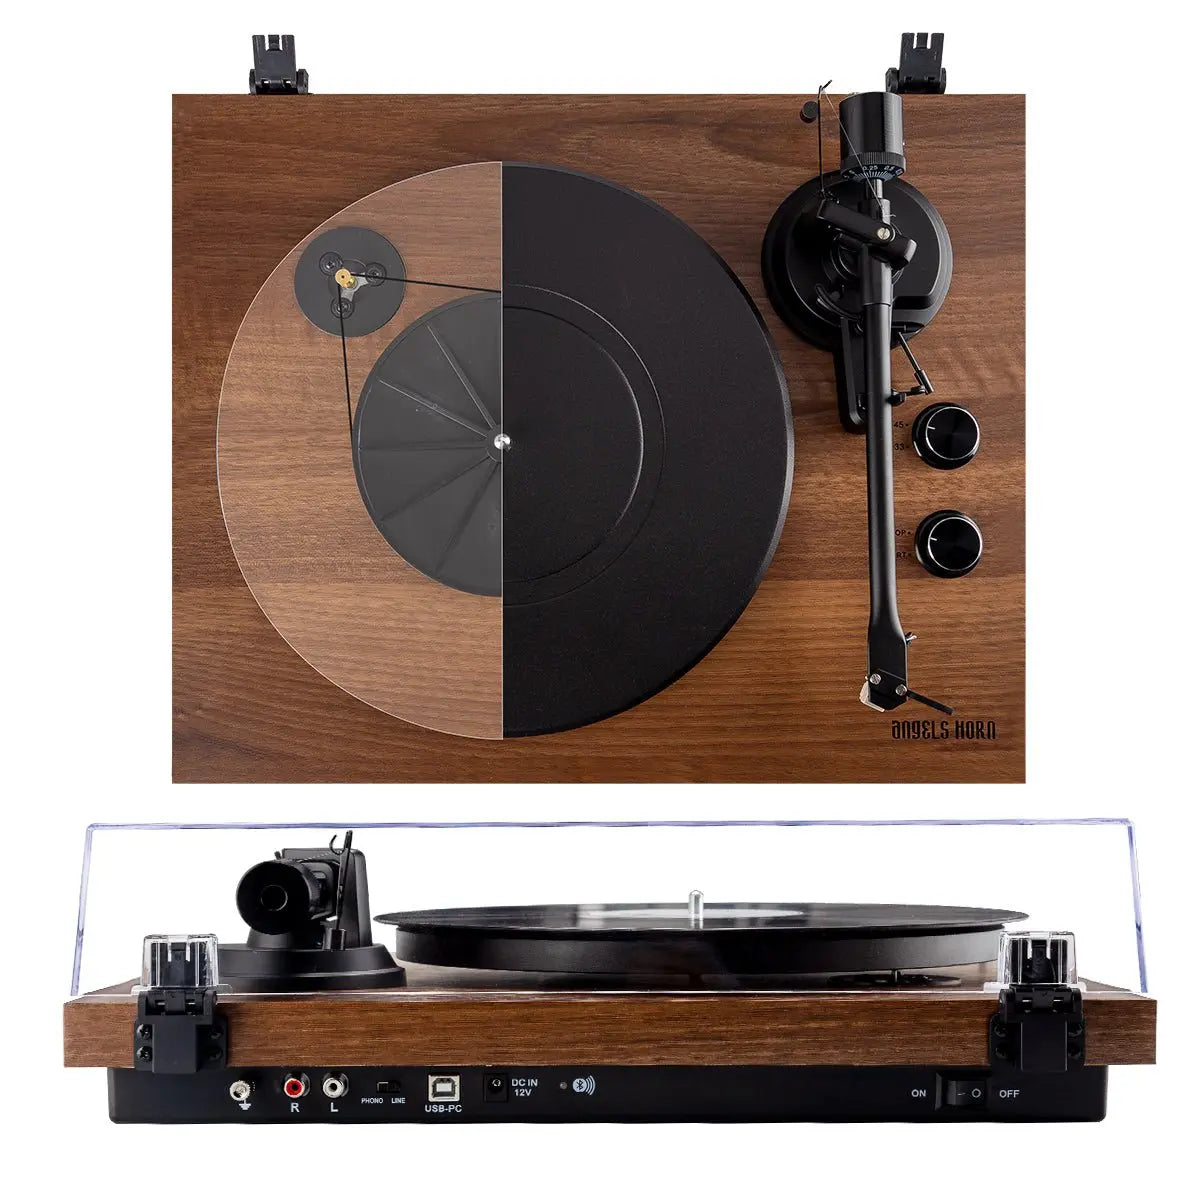 How to Operate Your Record Player？ | Angels Horn® - AngelsHorn